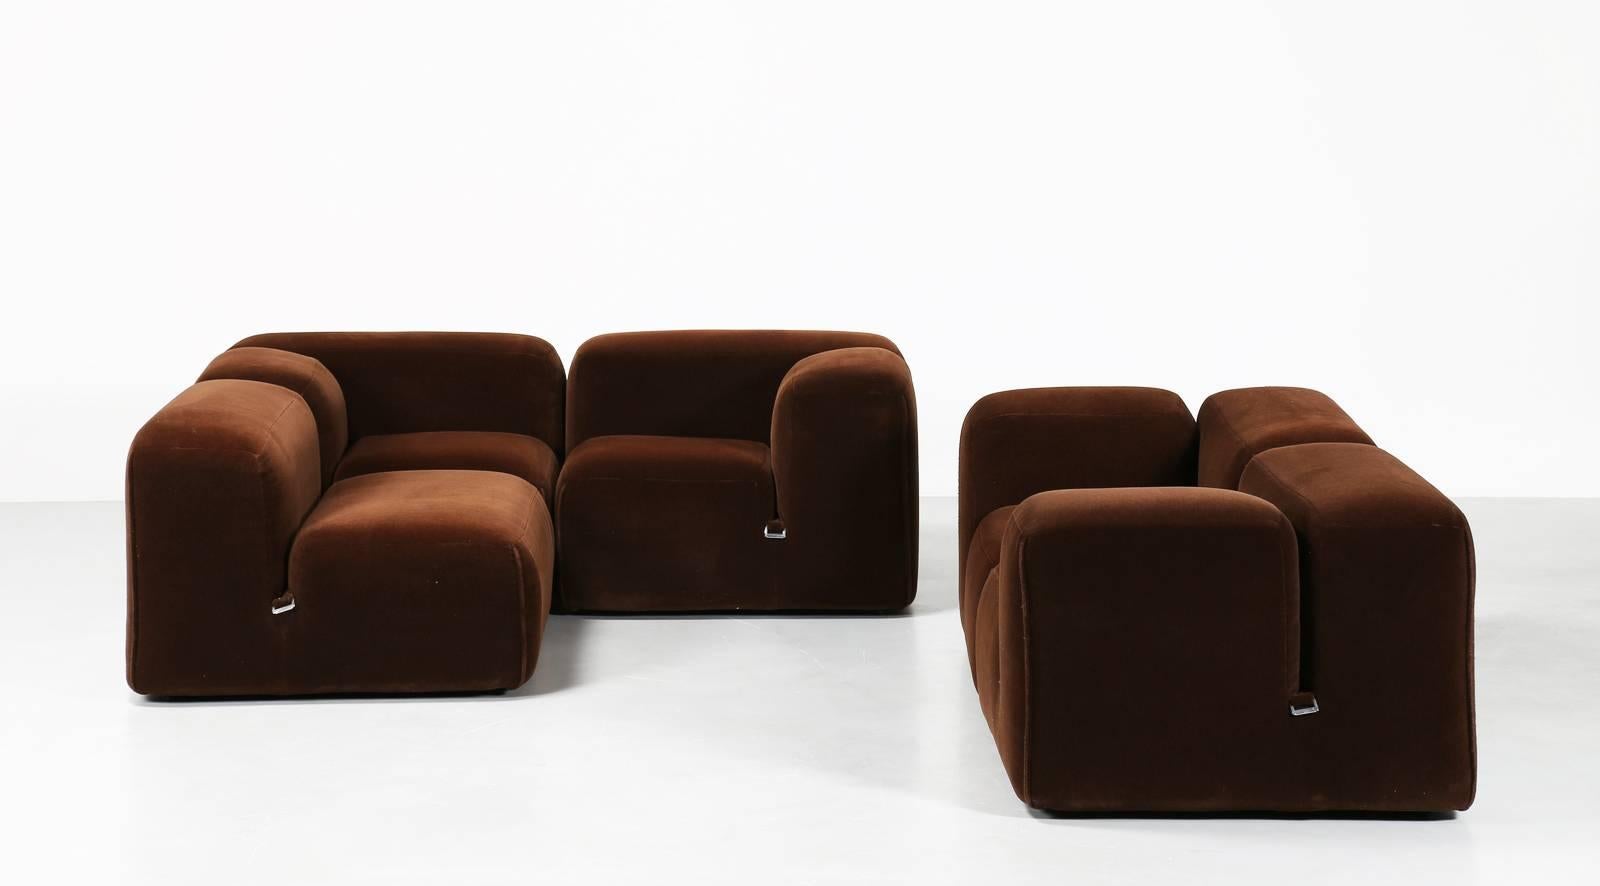 Rare Sofa "Le Mura", designed in 1972 by Mario Bellini for Cassina Spa, Italy.
Sofa range of five dark brown velvet elements.
Each one Measures:
Width 35.43 in. (90 cm), height 23.62 in. (60 cm), depth 35.43 in. (90 cm).
Excellent